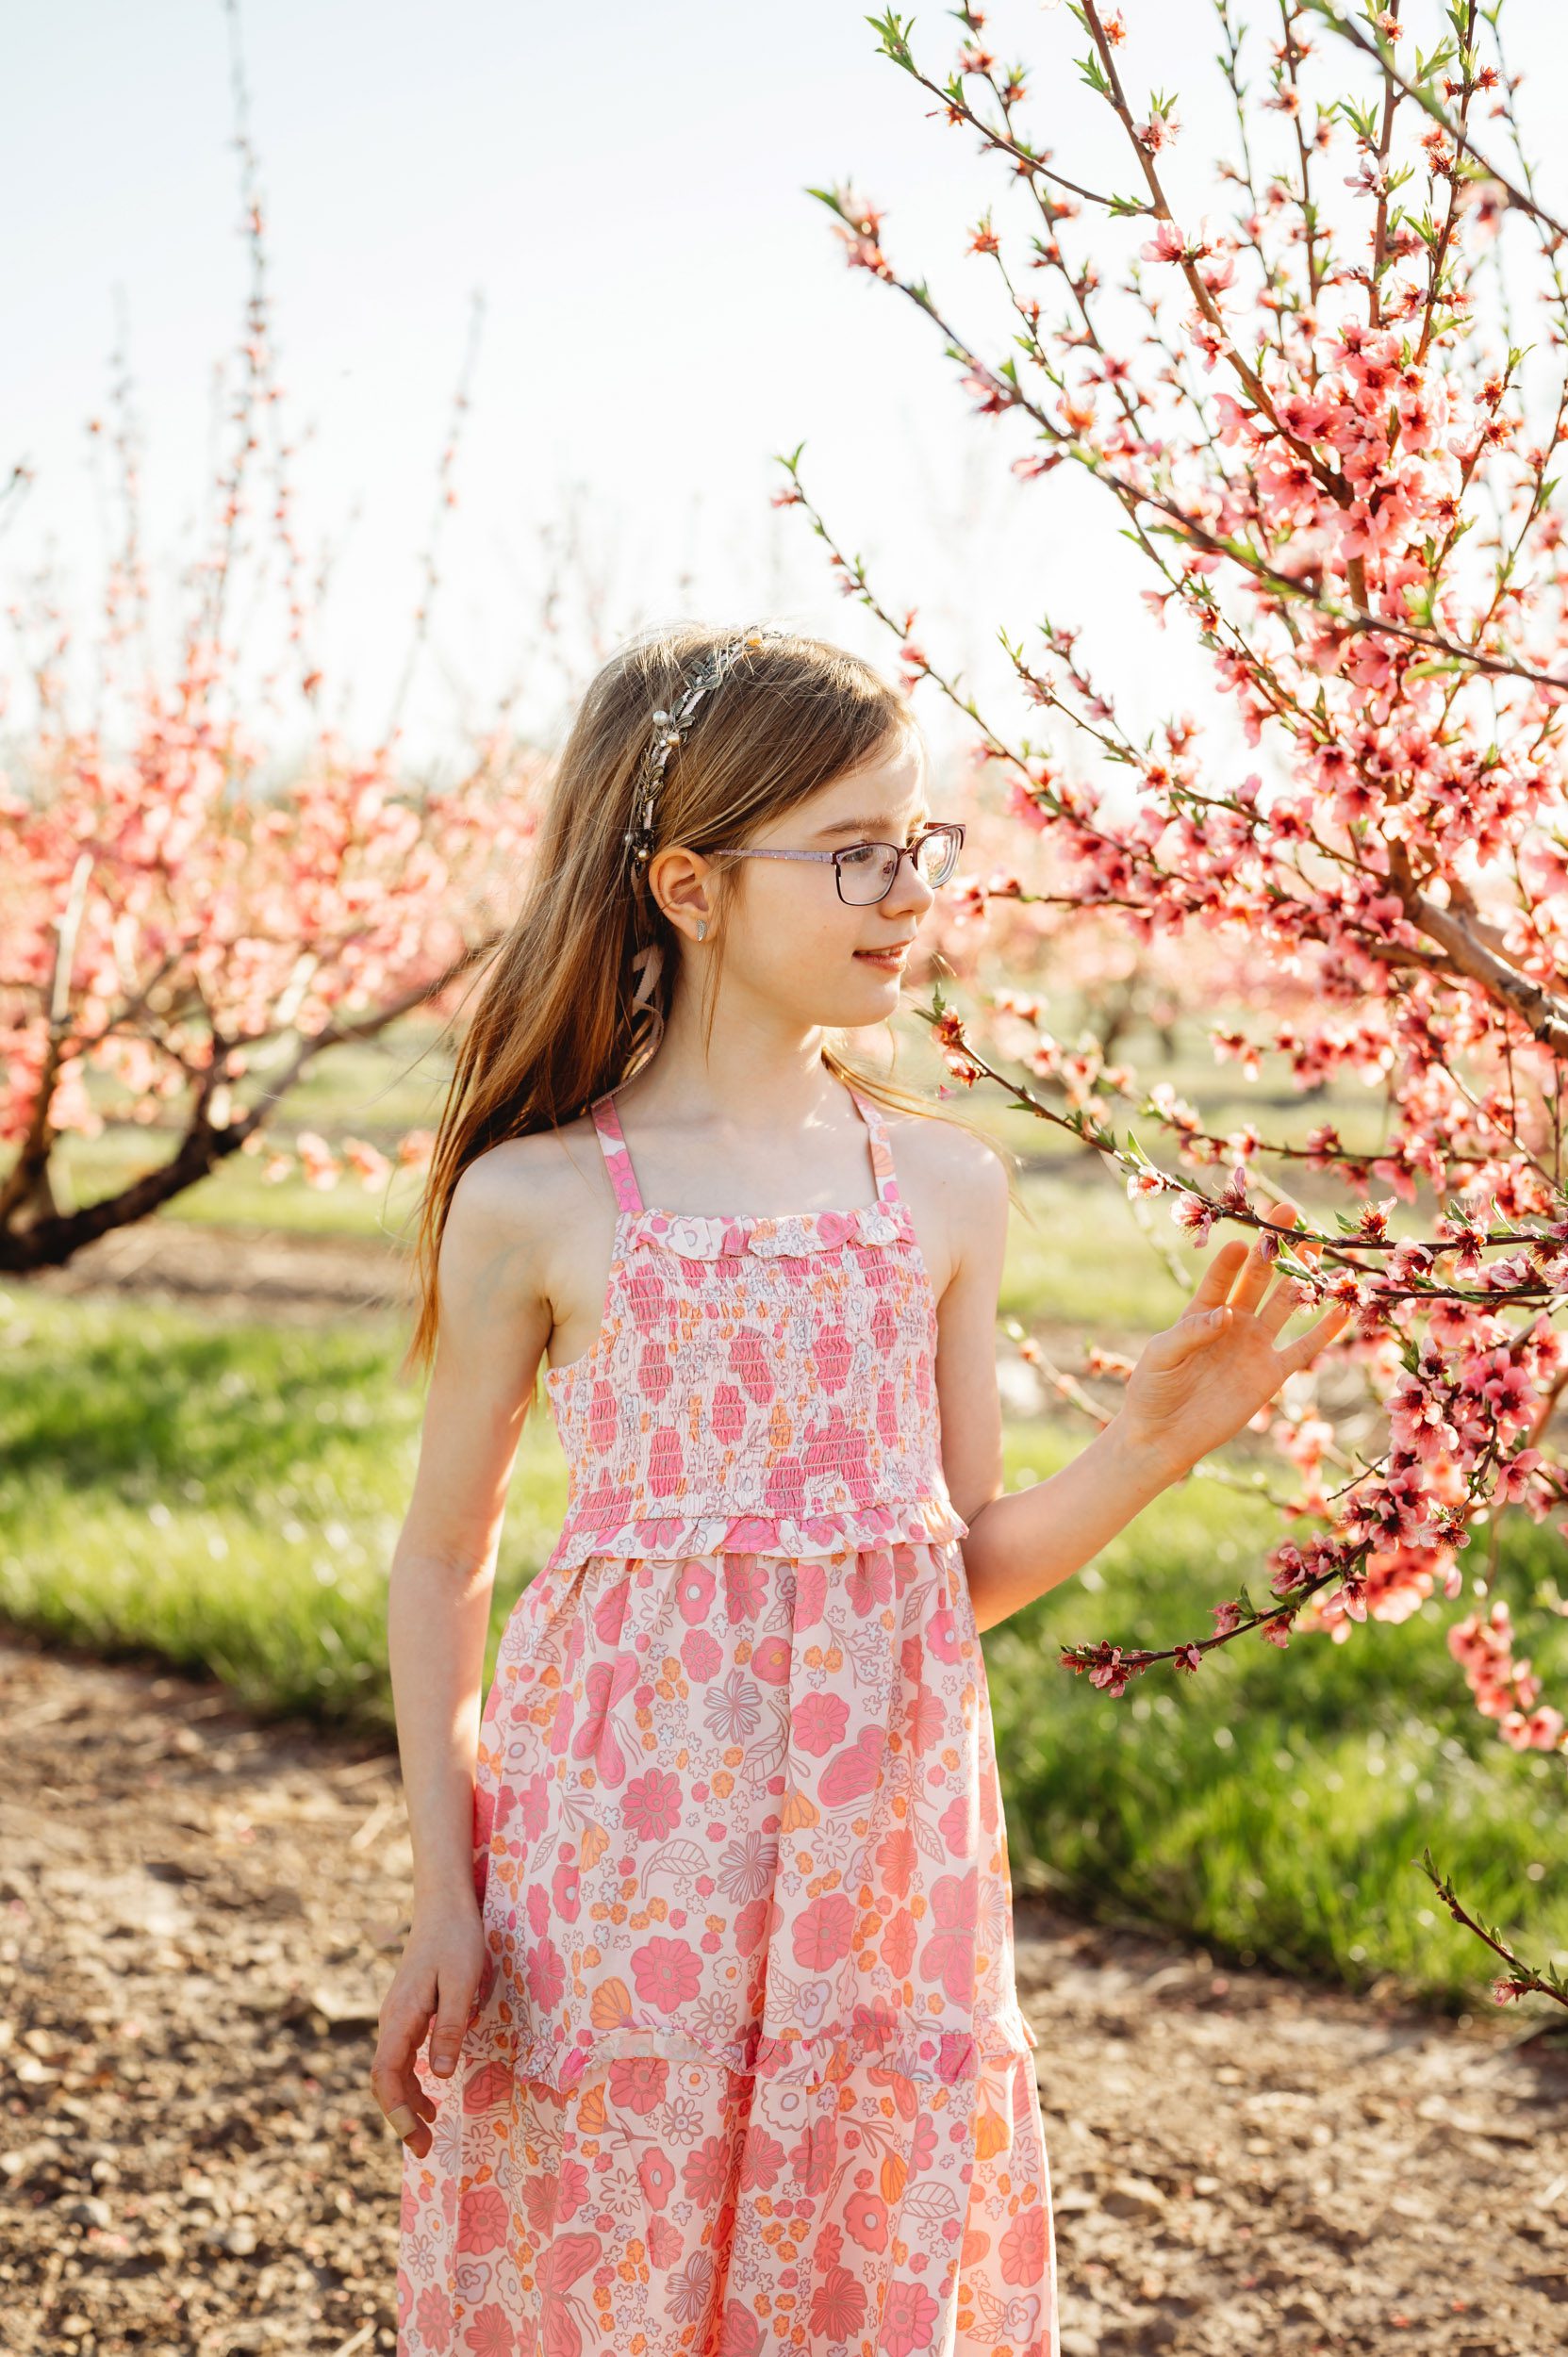 a young girl standing in an orchard full of peach trees in bloom and reaching out to touch a flower with her hand during a spring mini session